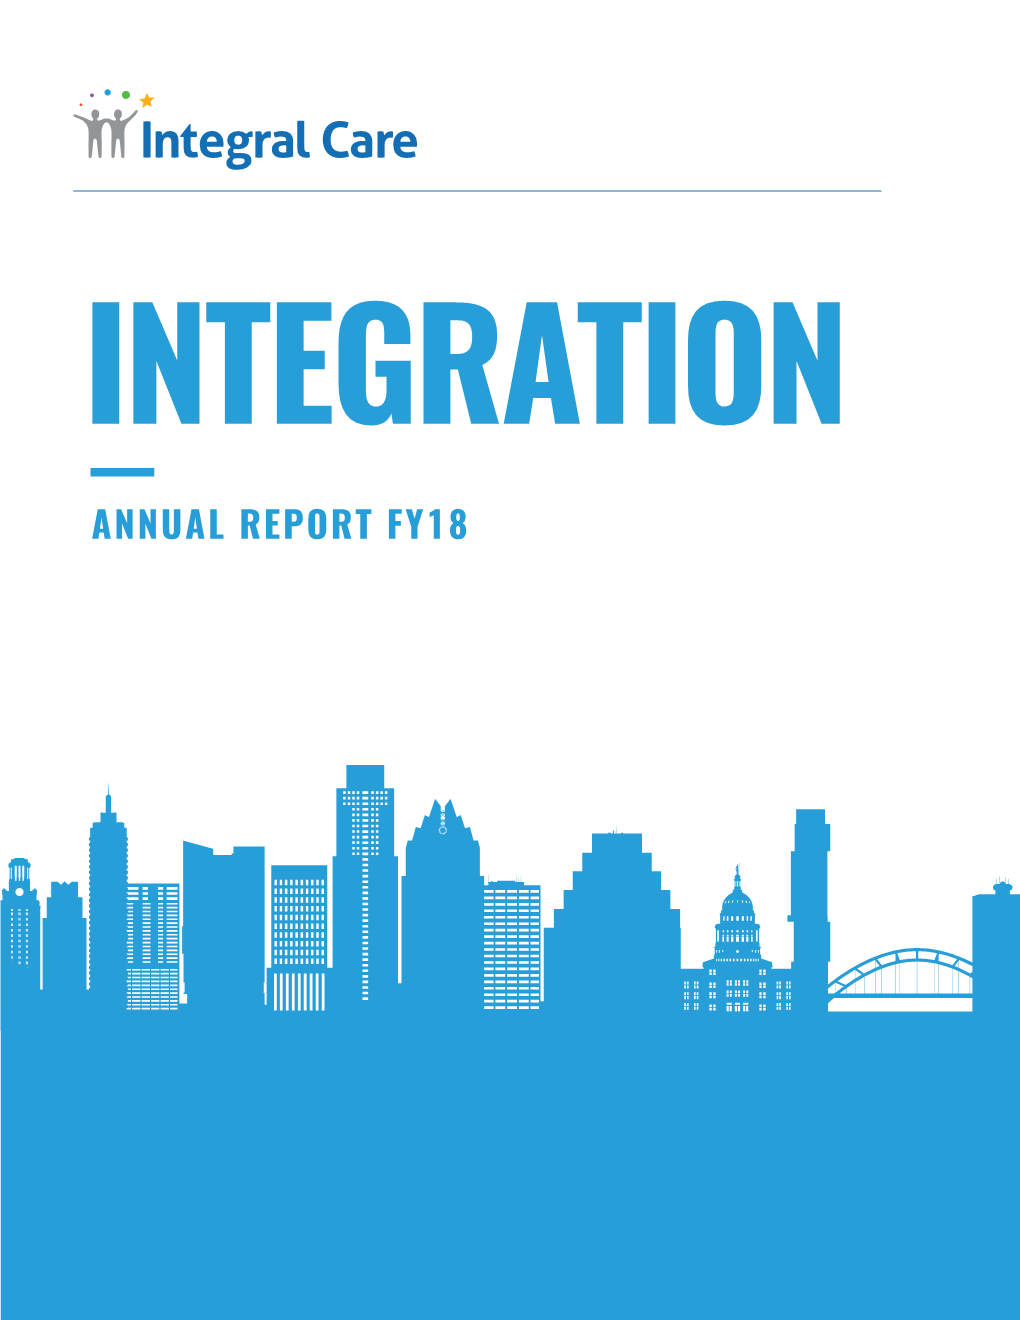 ANNUAL REPORT FY18 2 Annual Report FY18 Integralcare.Org